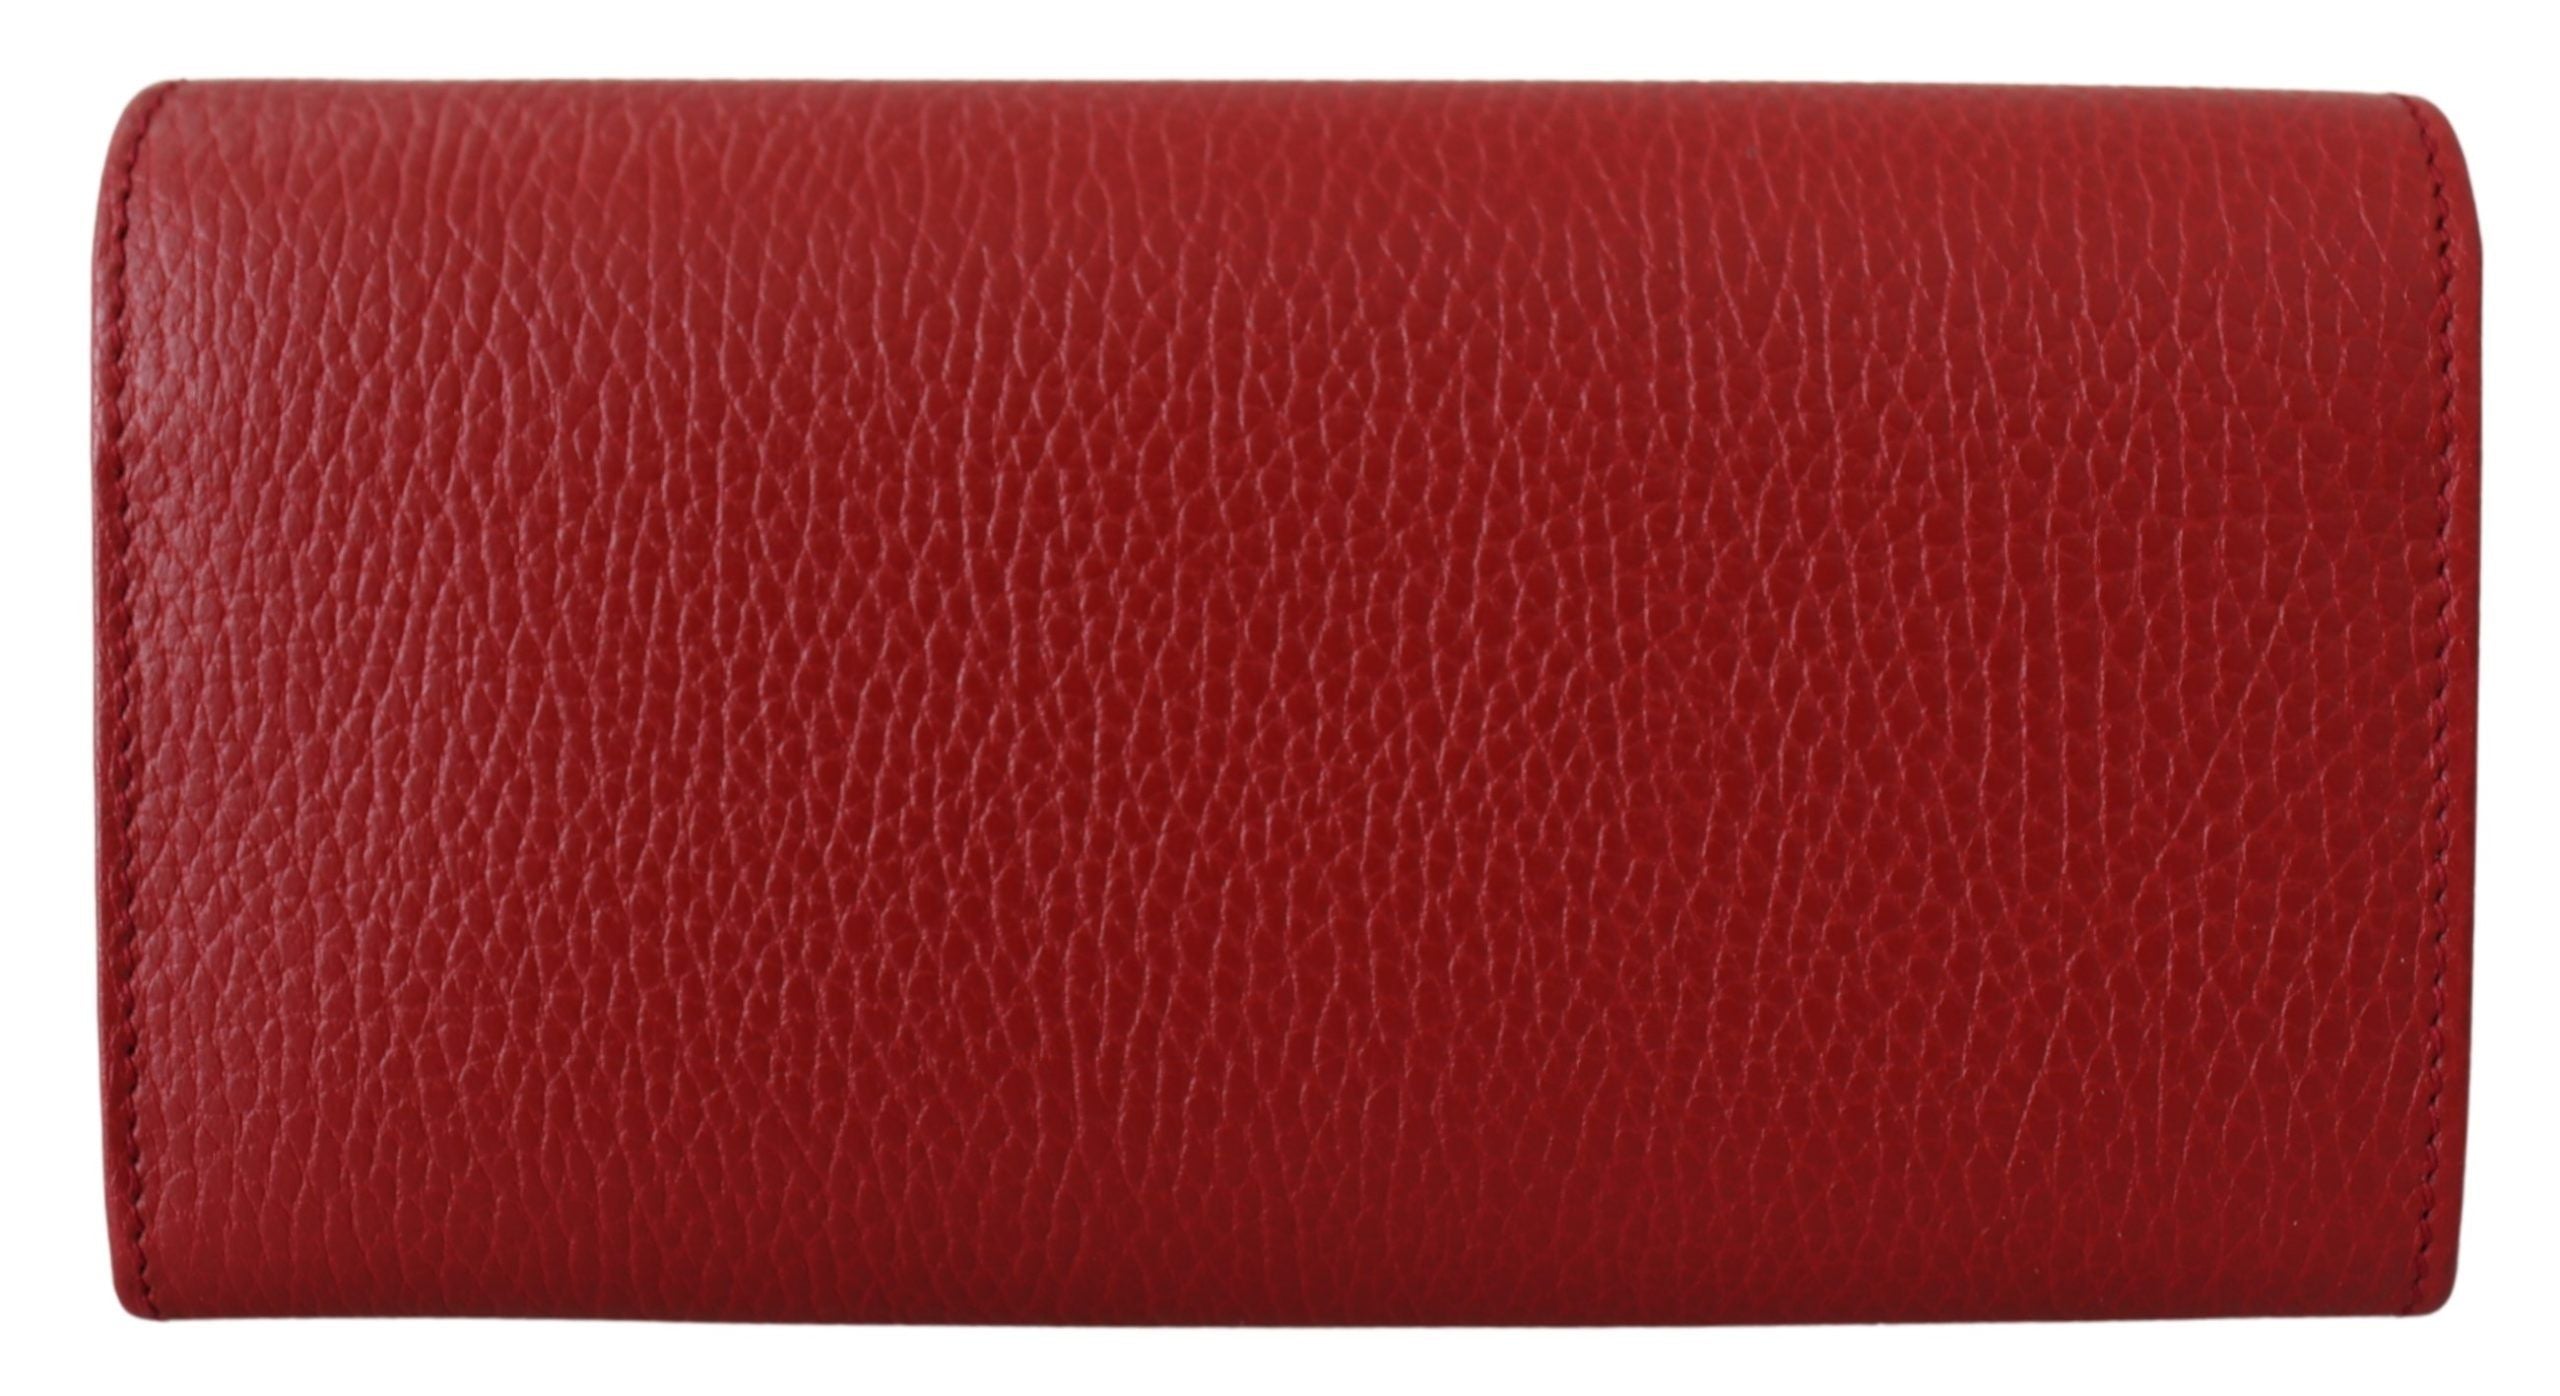 Gucci Elegant Red Leather Wallet with Iconic Interlock